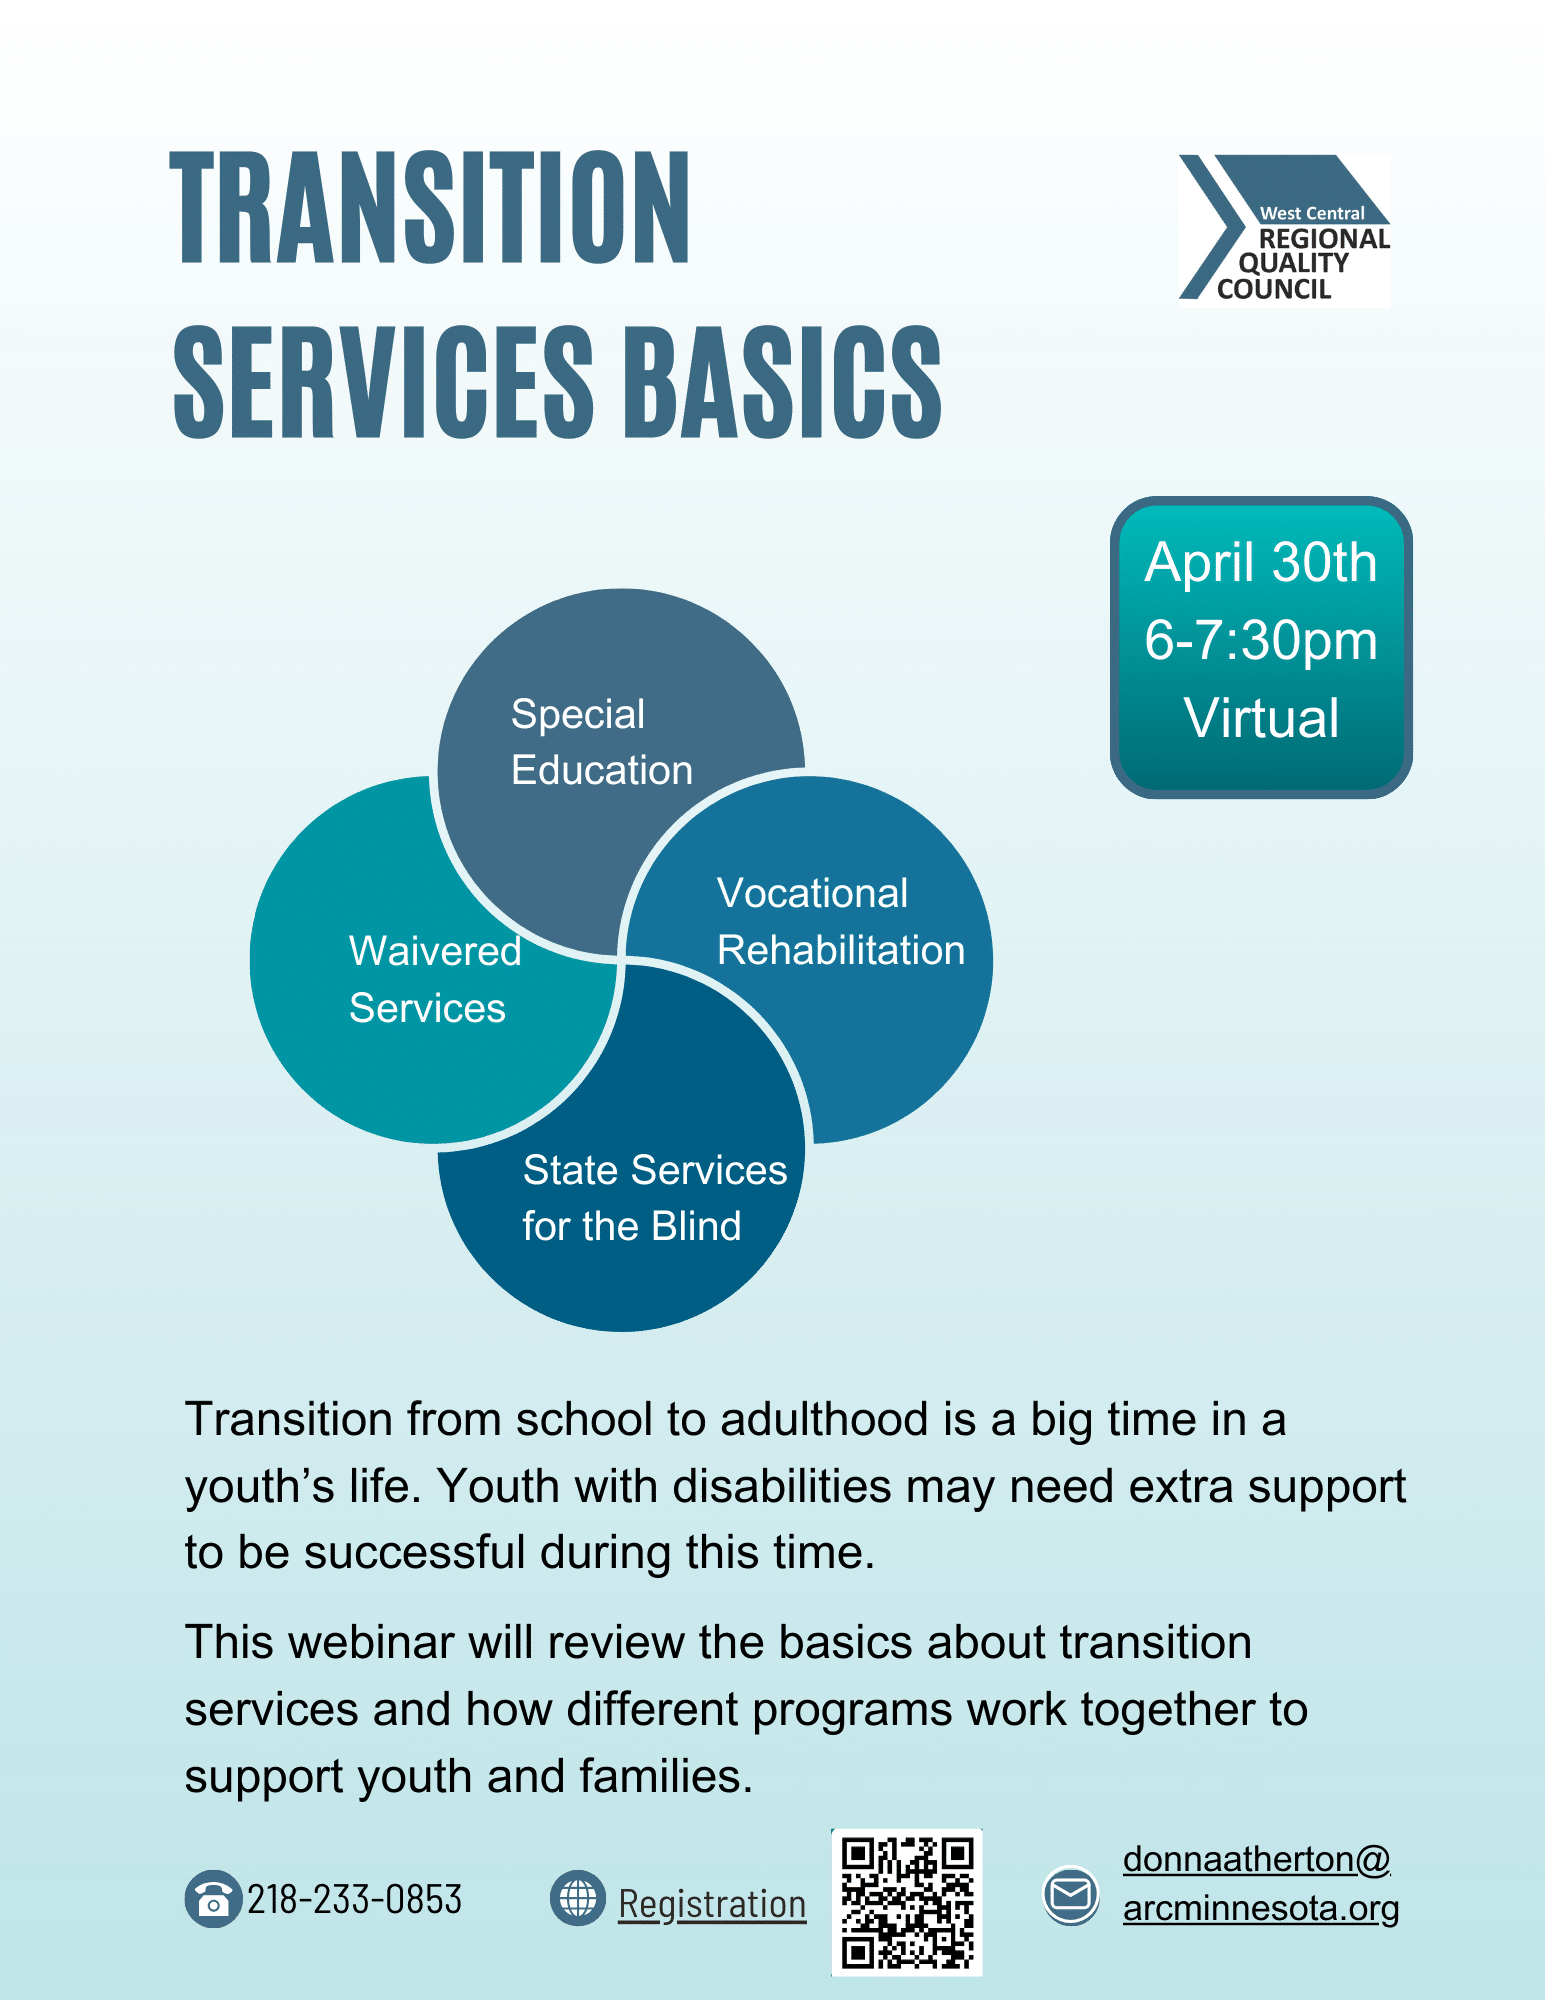 Transition Service Basics is a Blend of Services from Vocational Rehabilitation, Special Education, State Services for the Blind, and Waivered Services